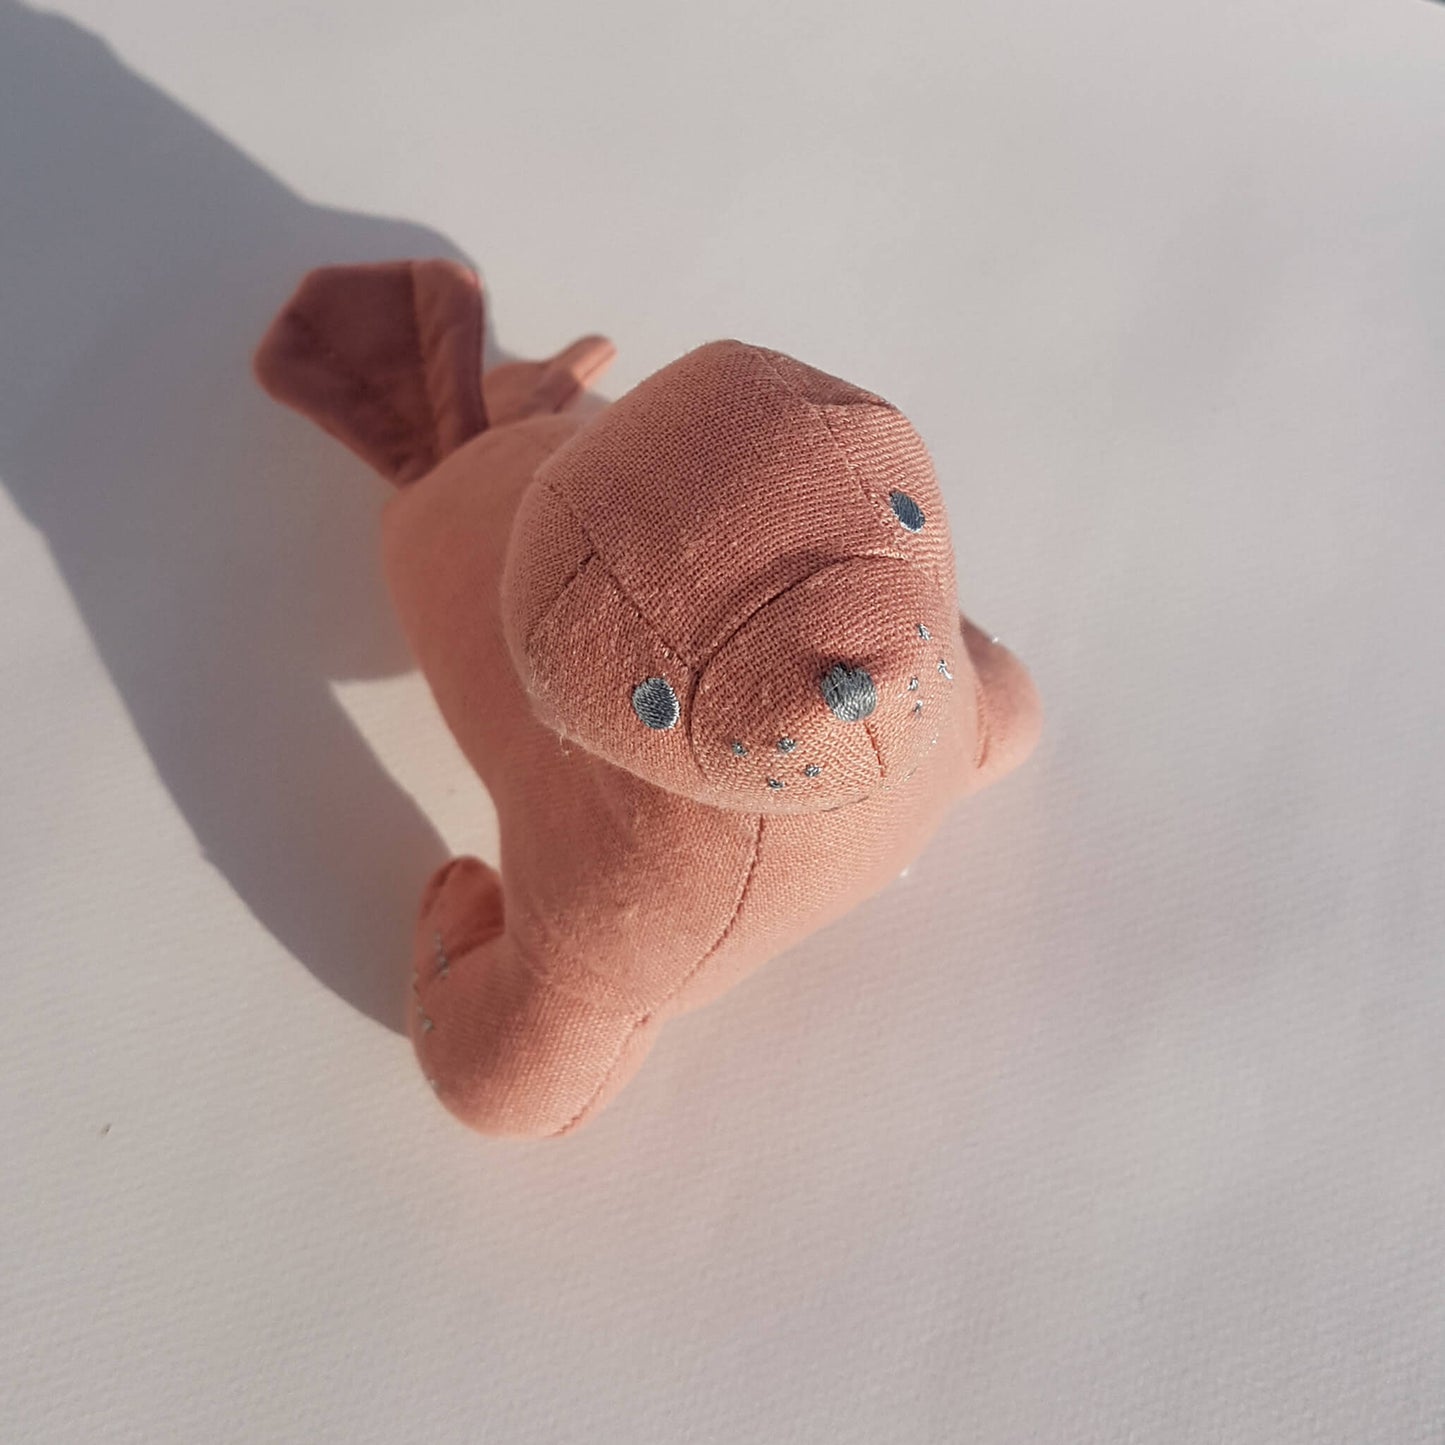 Small Seal Cuddle Toy - Unik by Nature